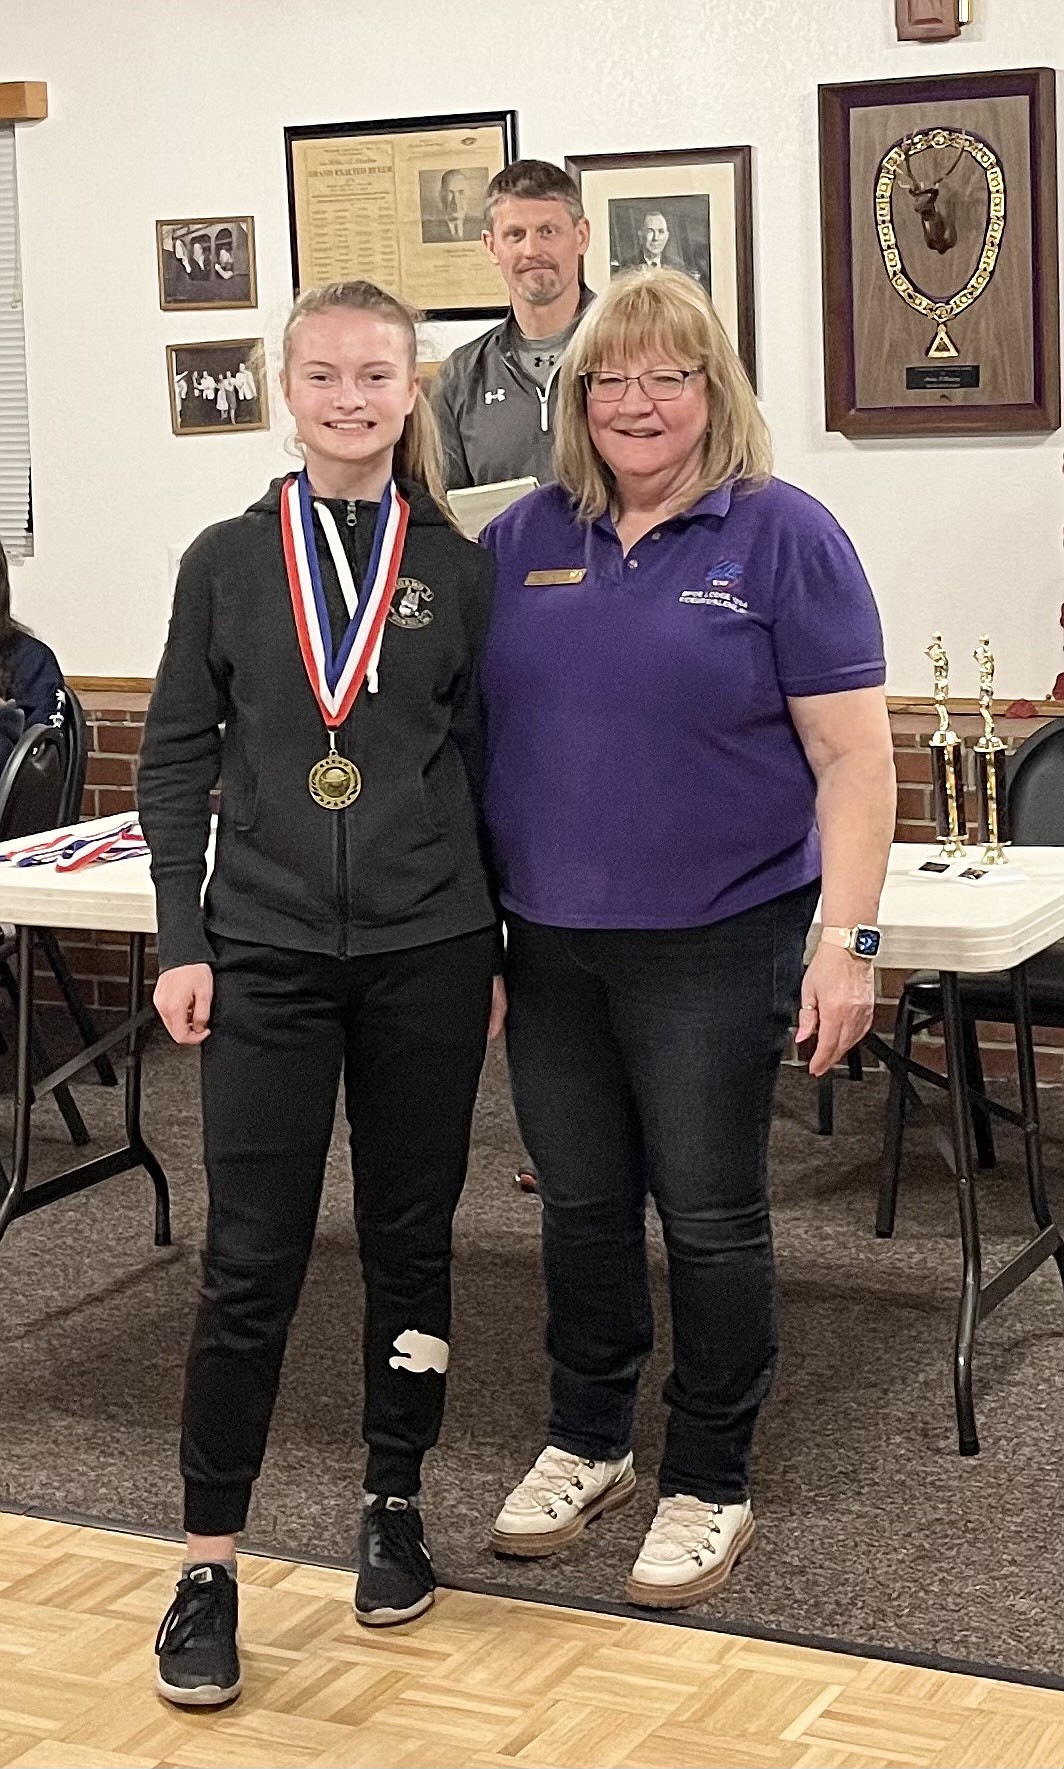 Courtesy photo
Malia Miller won the girls 12-13 age division at the Coeur d'Alene Elks Hoop Shoot held Feb. 20 at The Courts at Real Life in Post Falls. Also pictured is Debbi Nadrchal, Elks Exalted Ruler, and Todd Stoddard, Hoop Shoot director.